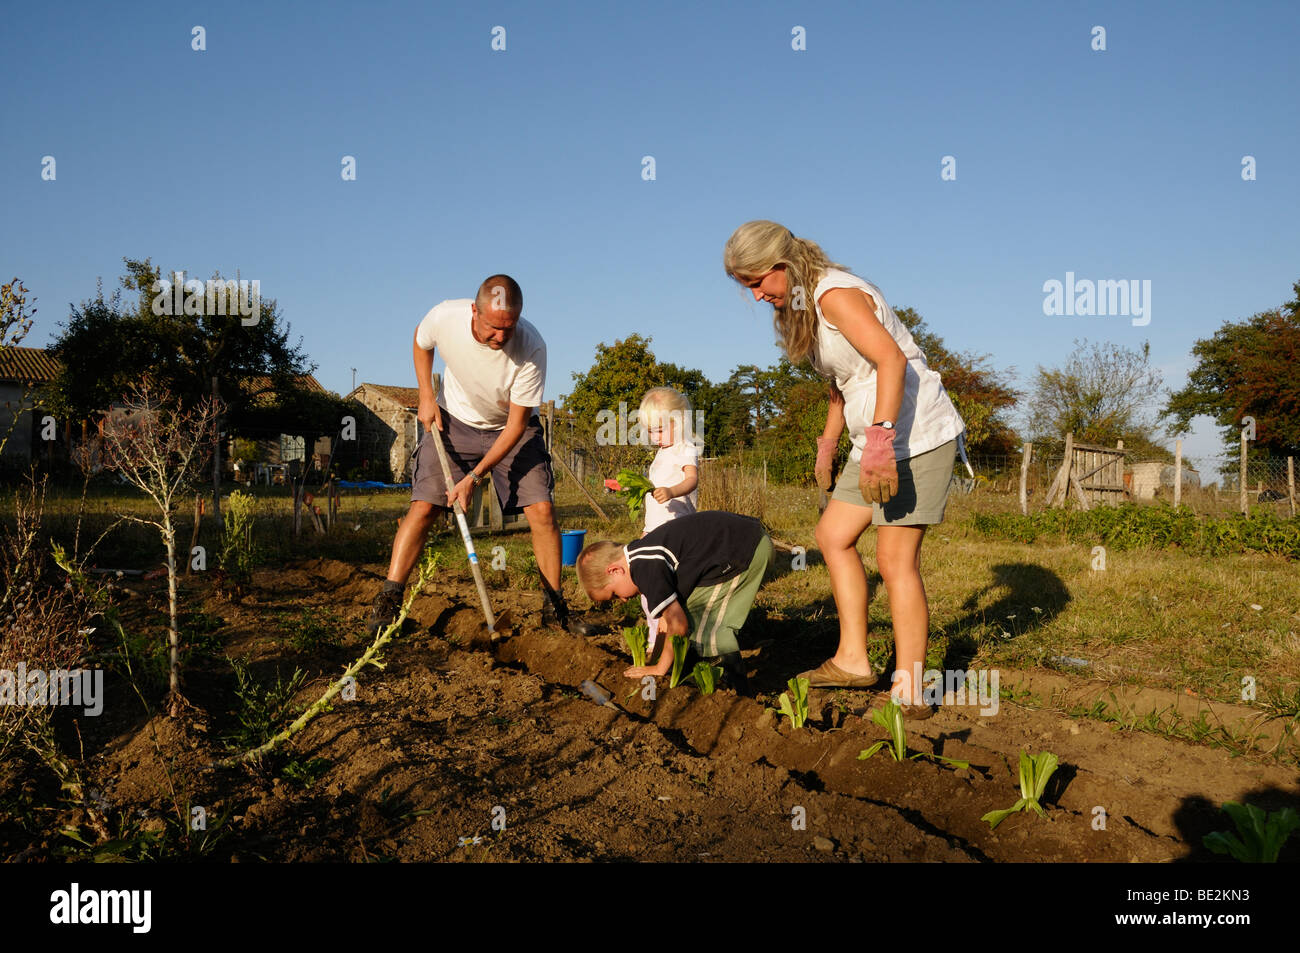 Stock photo of a family working together in the garden planting lettuce. Stock Photo